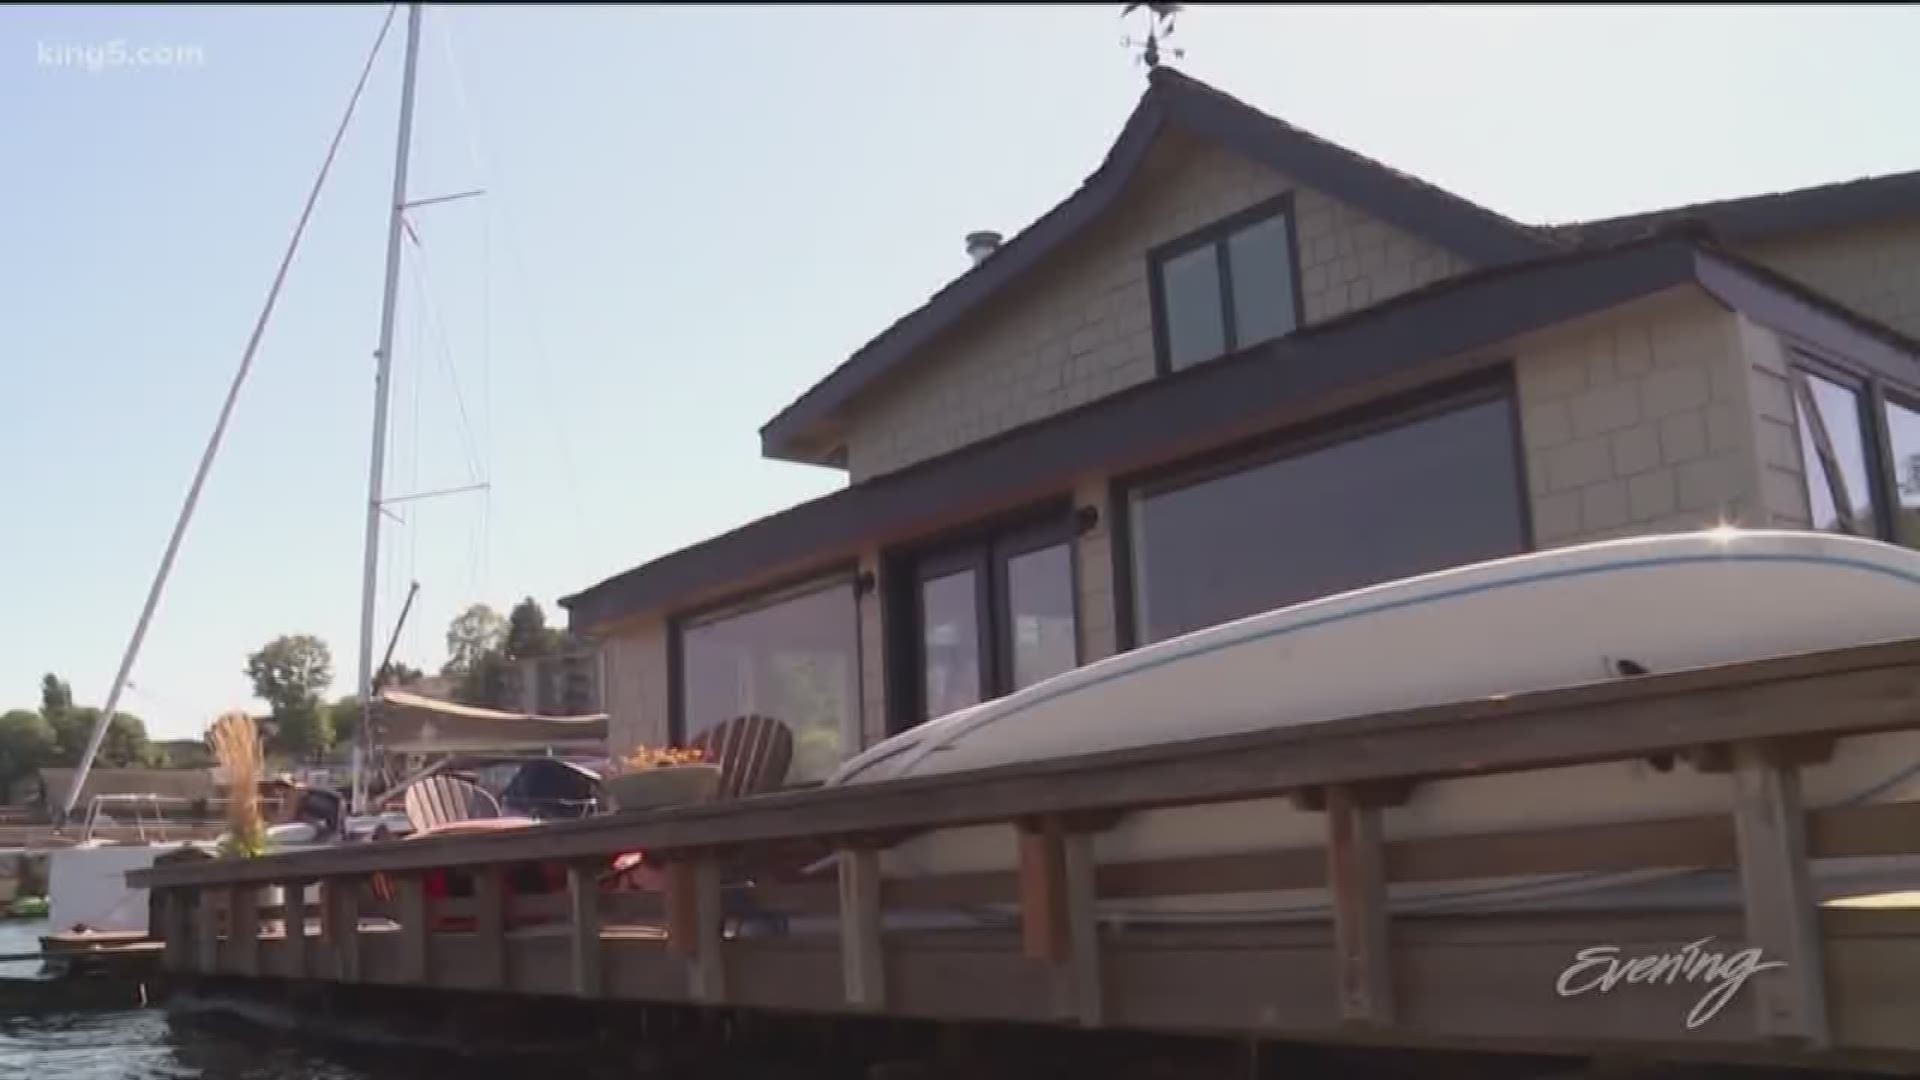 From the outside, the floating home made famous in the movie "Sleepless in Seattle" looks pretty much the same. But inside, a major makeover.